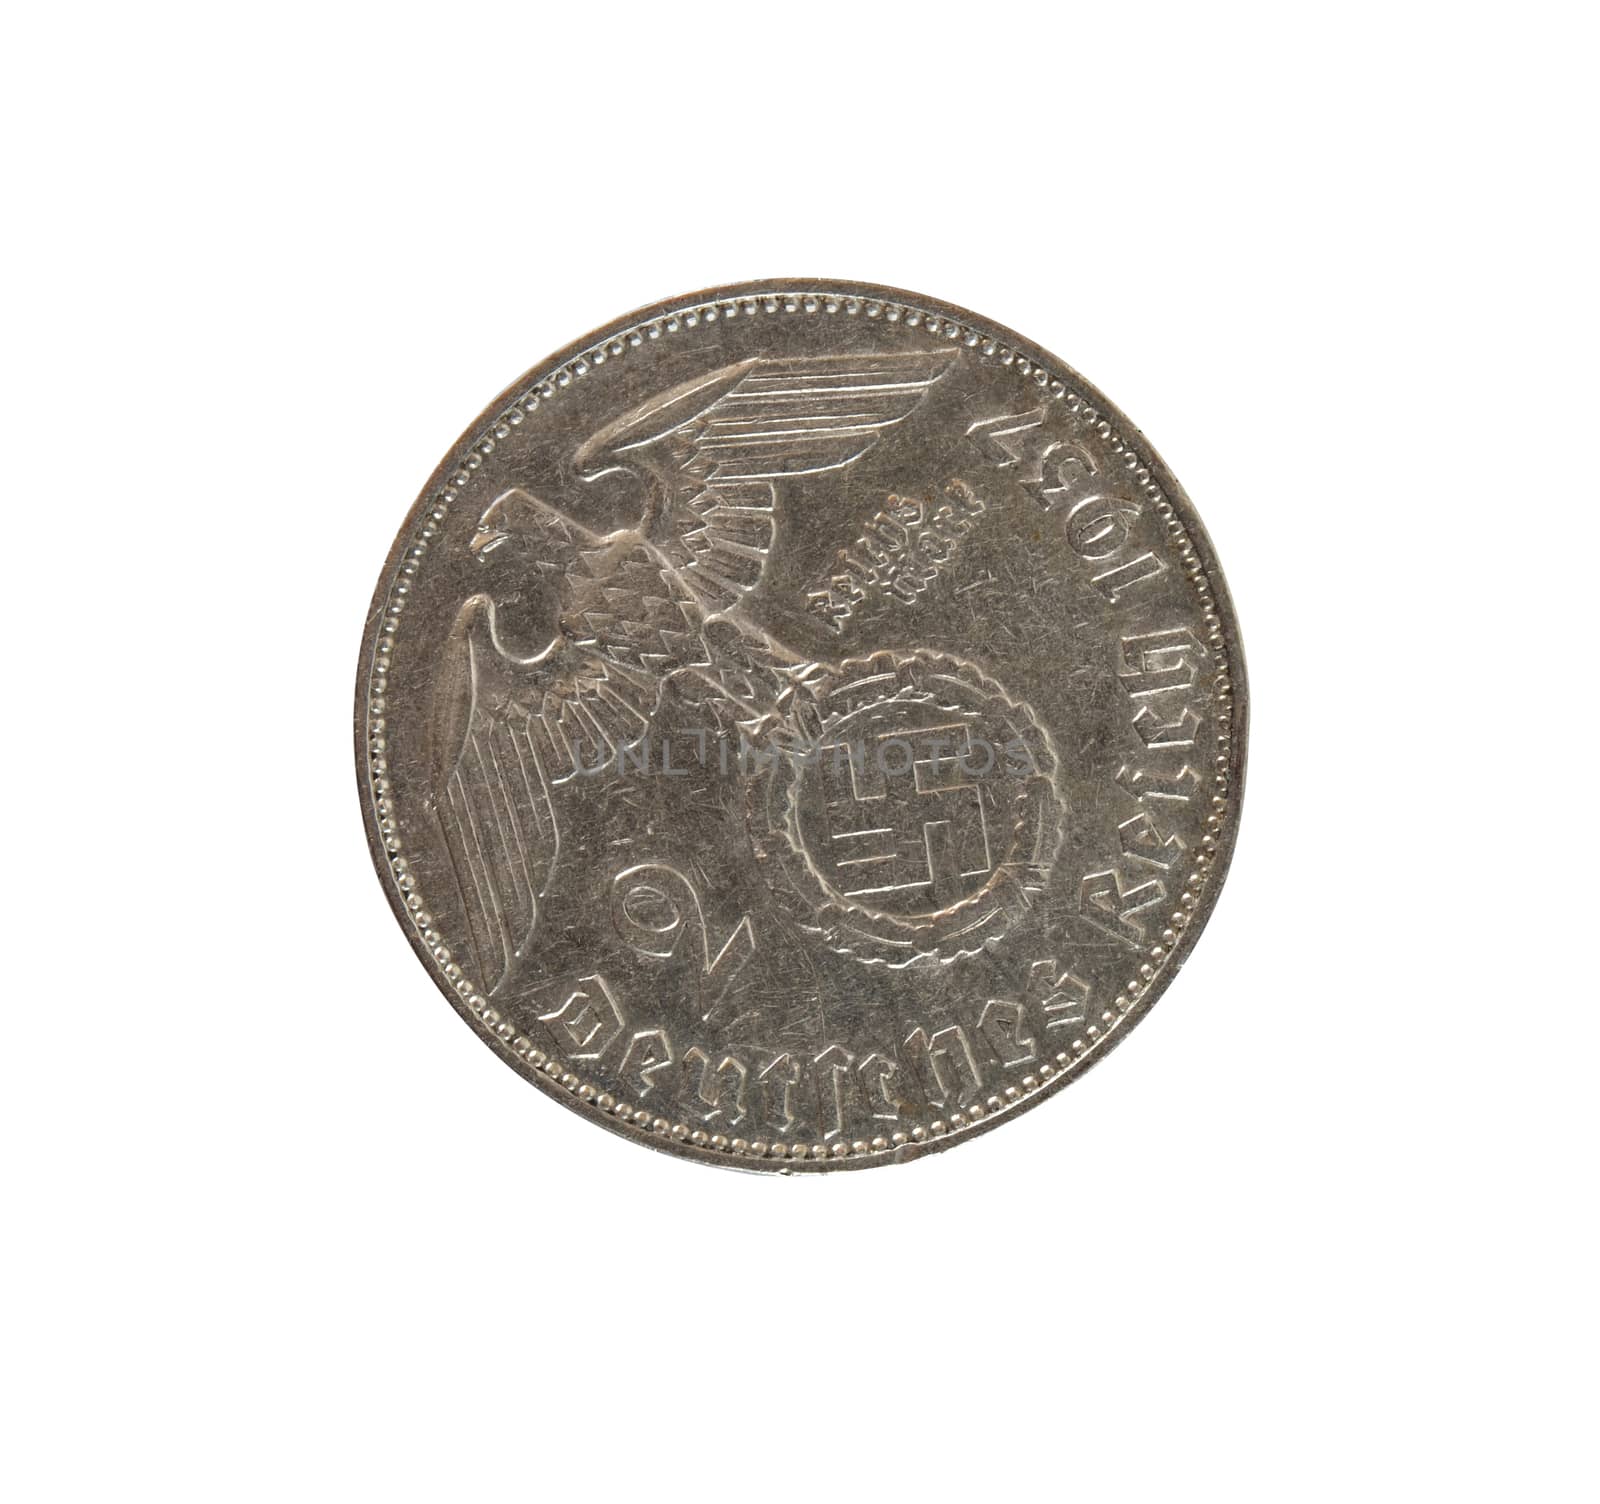 German Two Marks coin from 1937.